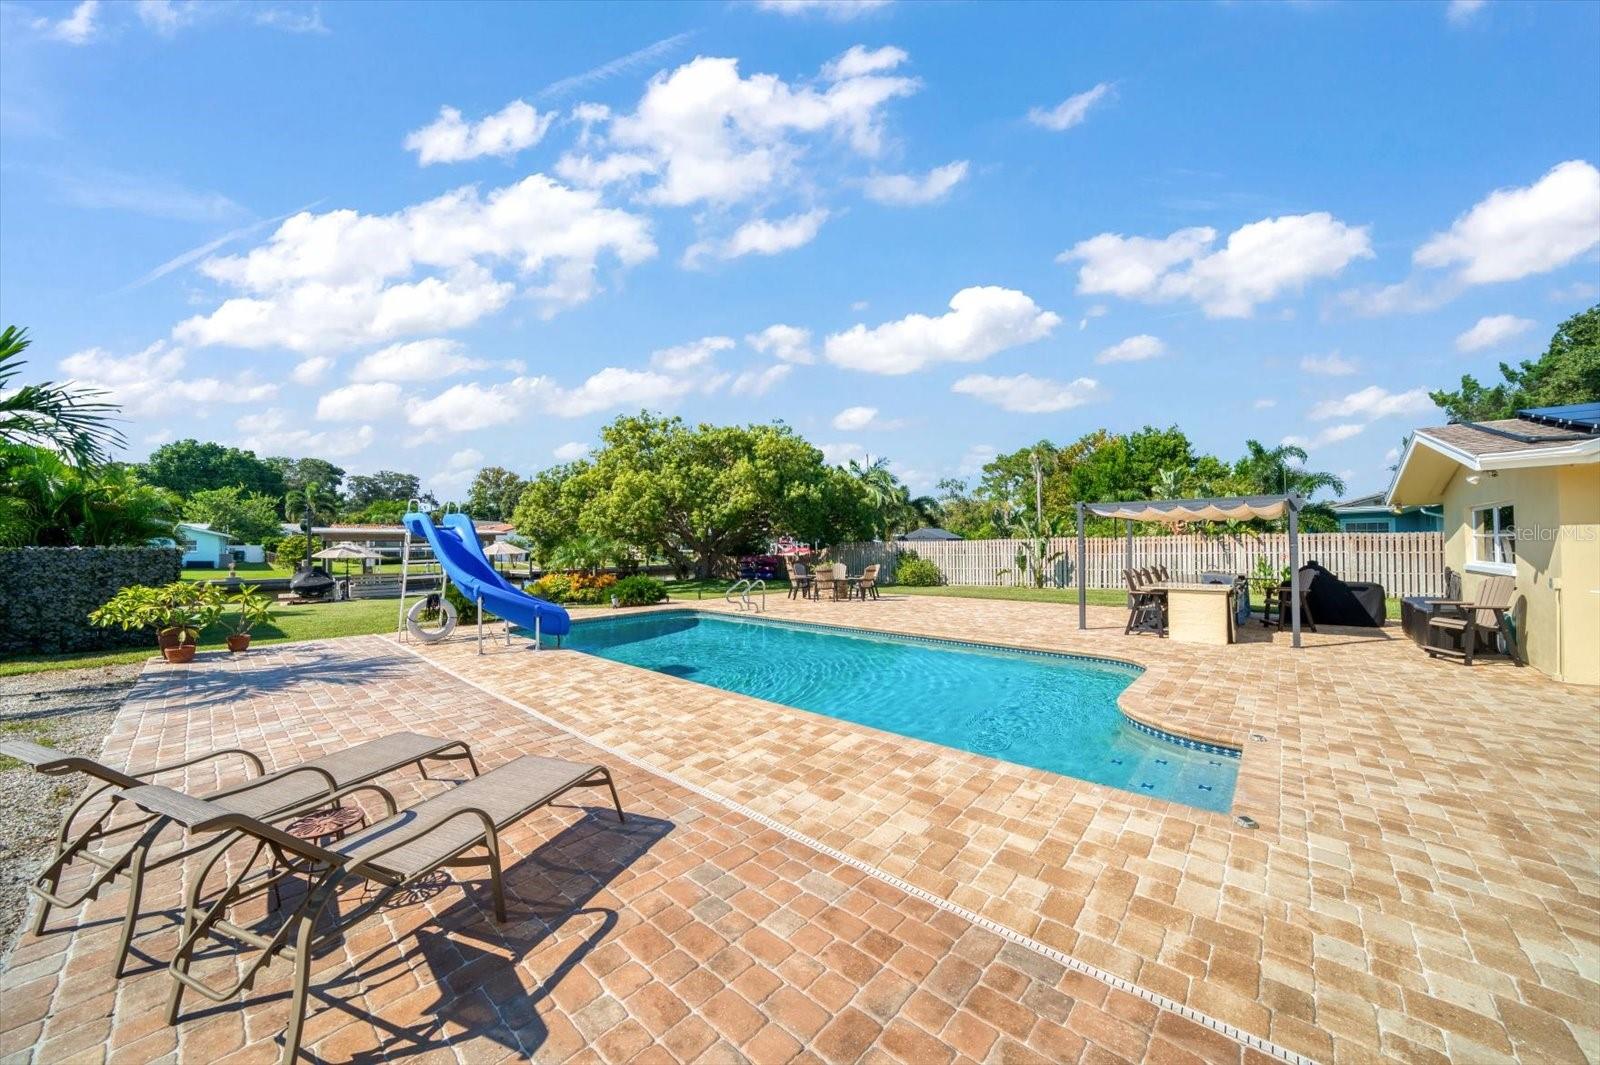 Lots of room for parties, cook outs and friends and family to enjoy!